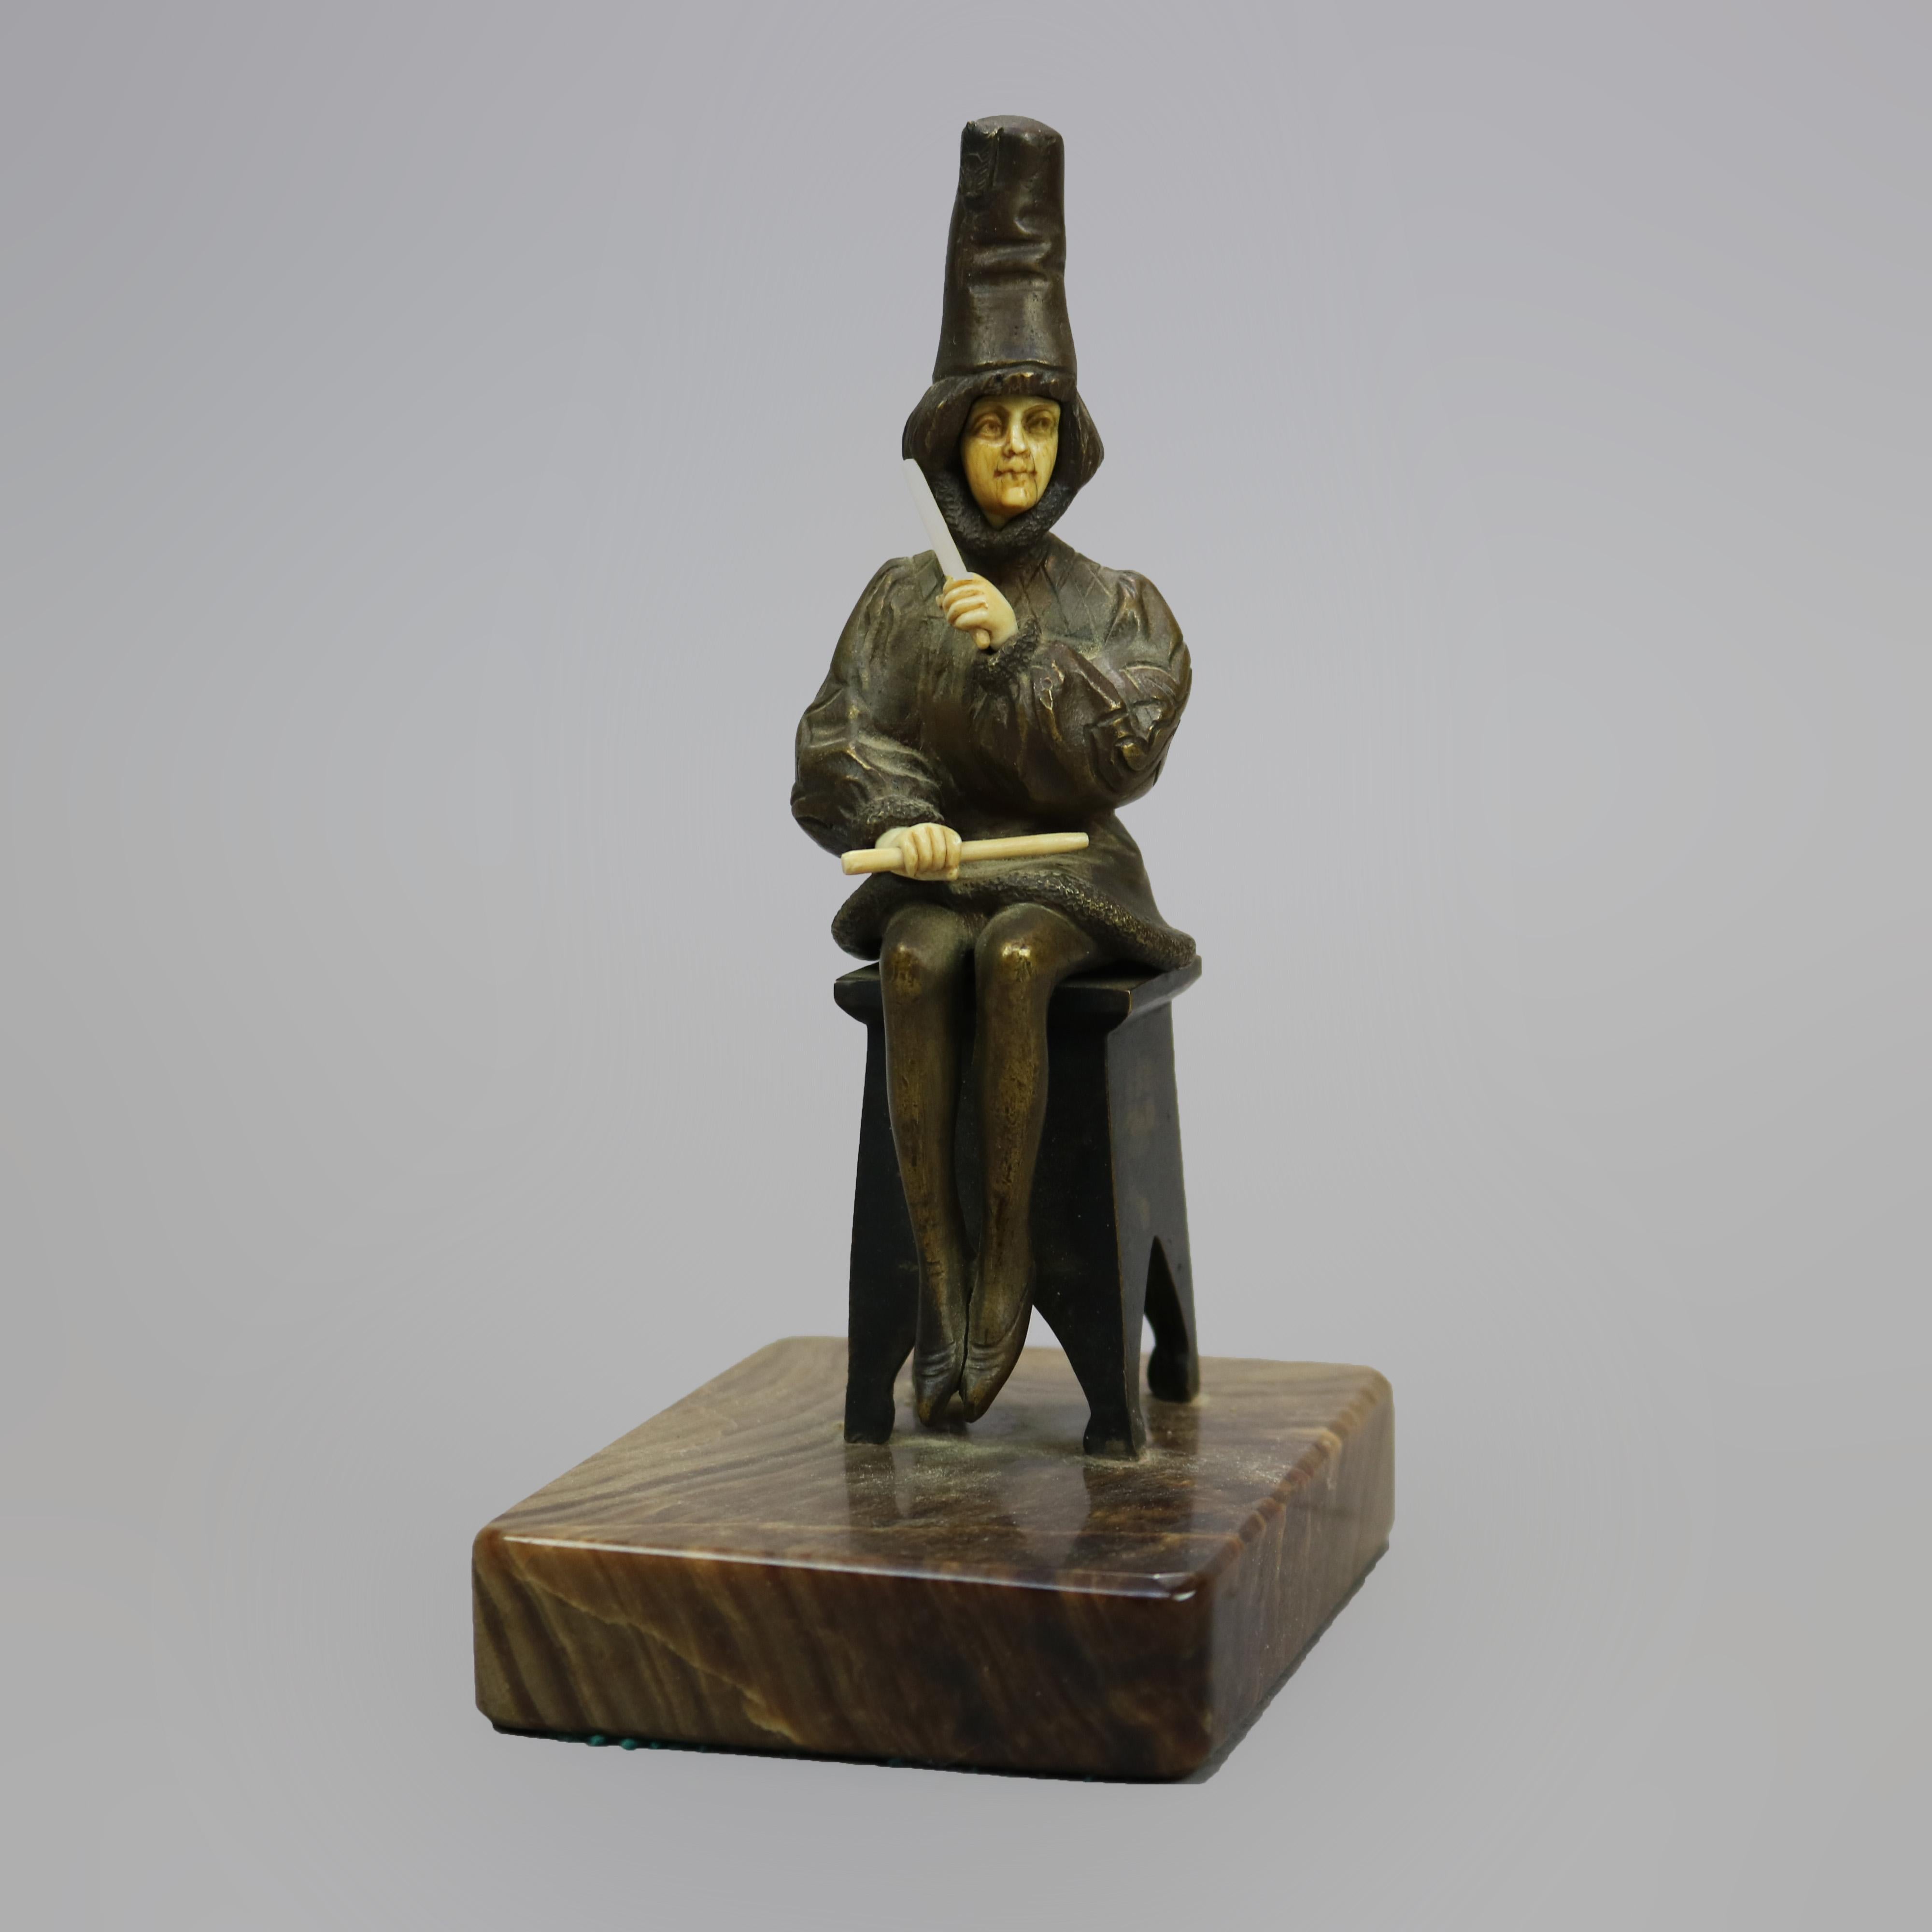 An antique bronze sculpture of a seated woman performer by Victor mounted on base with elements which appear to be carved bone, signed under seat 